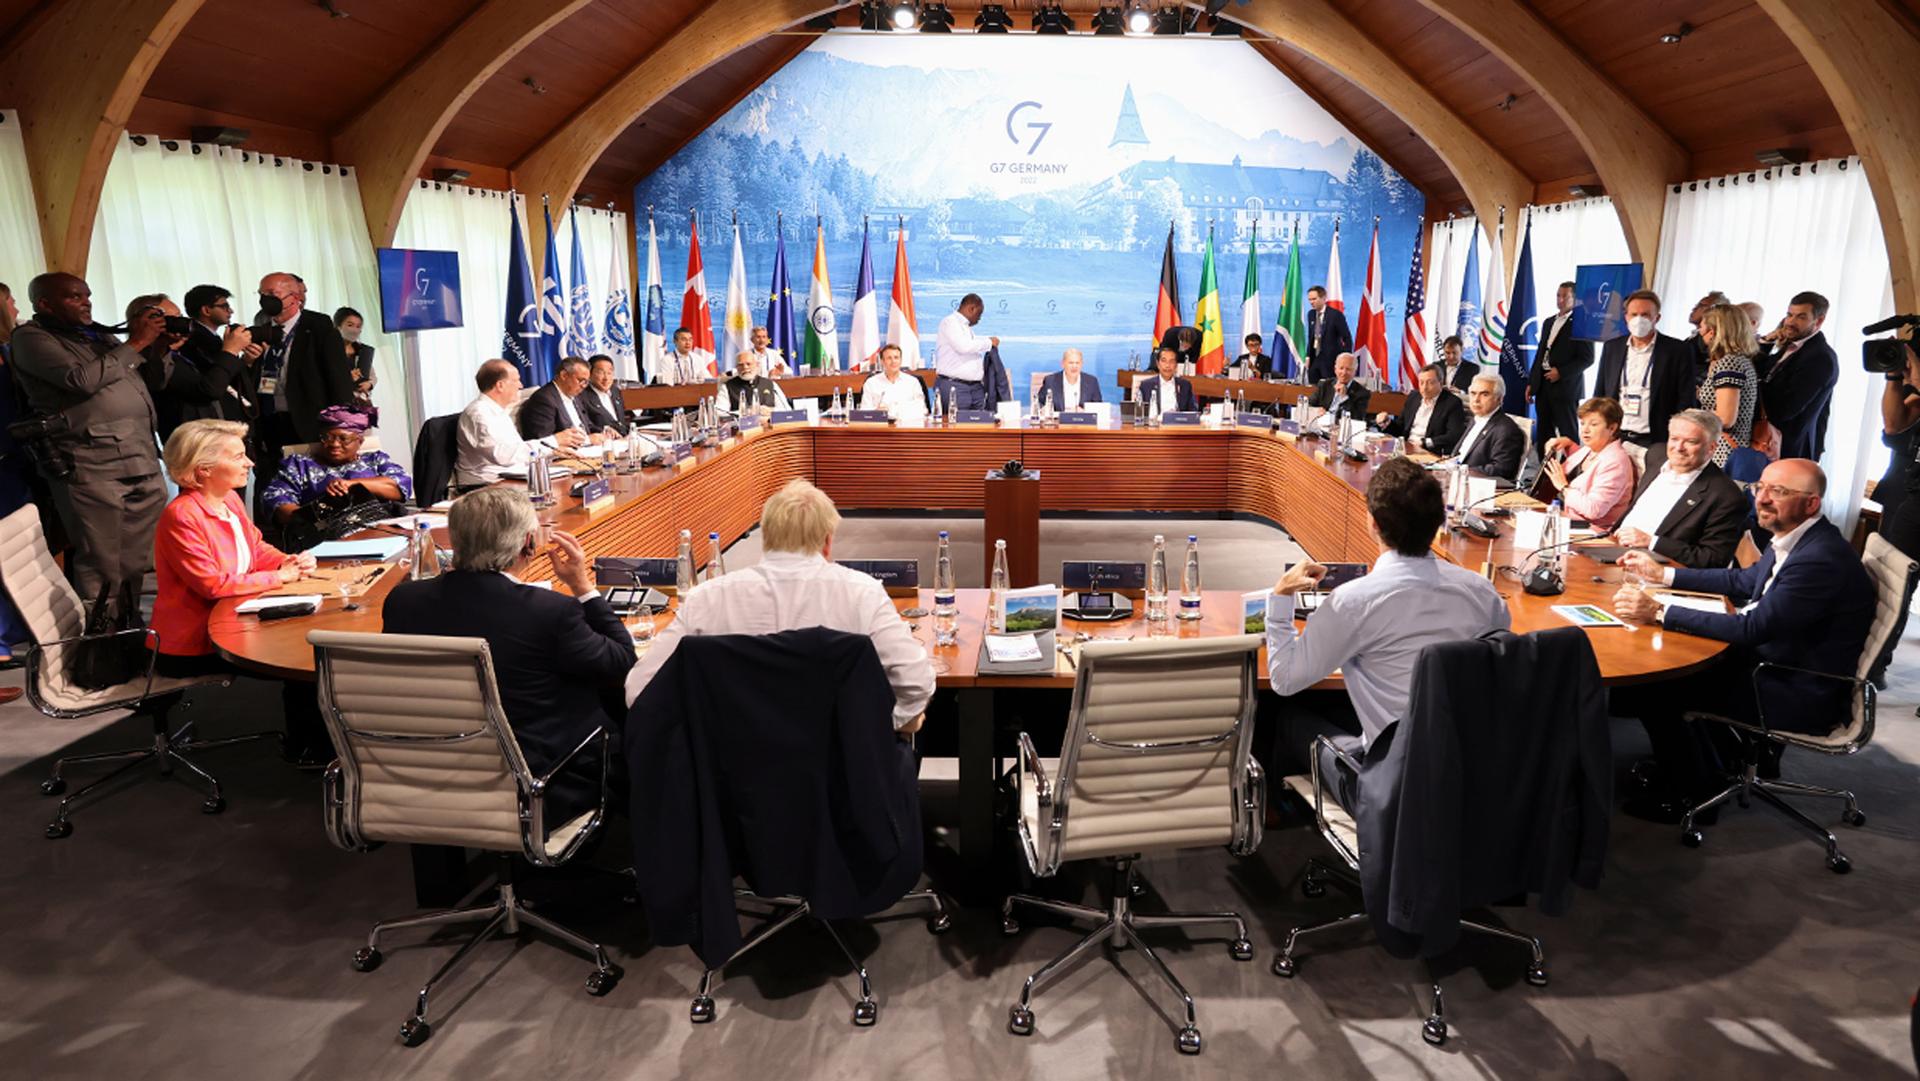 A general view of a G7 leaders meeting with outreach guests as part of the working session of the G7 leaders summit, Kruen, Germany